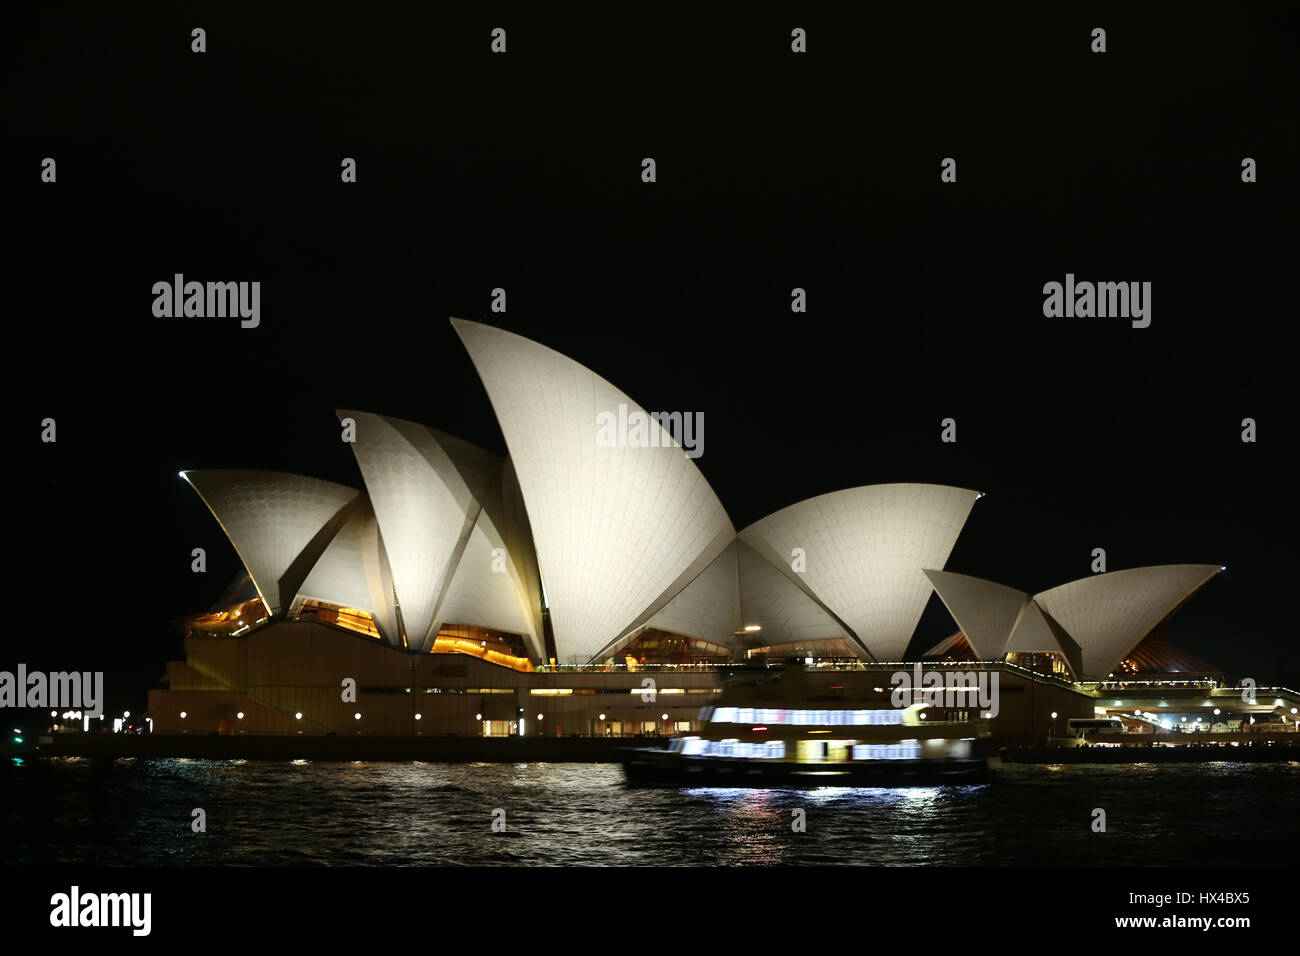 Sydney, Australia. 25 March 2017. The lights of the Sydney Opera House and the Sydney Harbour Bridge were turned off for one hour from 8:30pm to 9:30pm to mark ‘Earth Hour’. Pictured: Sydney Opera House just before Earth Hour. Credit: © Richard Milnes/Alamy Live News Stock Photo